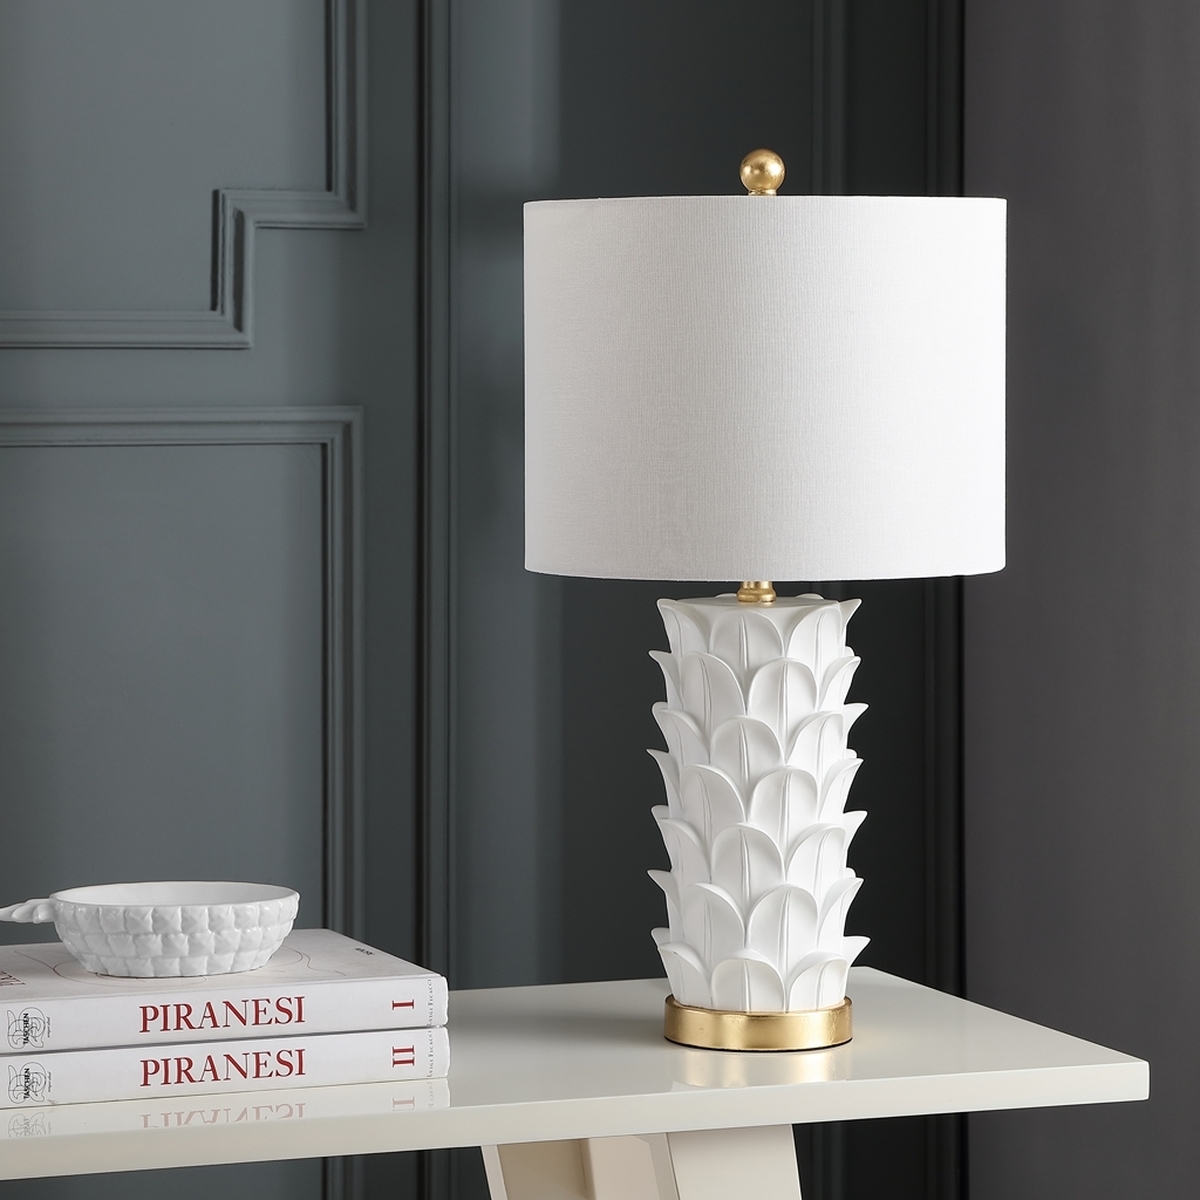 NICO TABLE LAMP (price to confirm) - Image 0